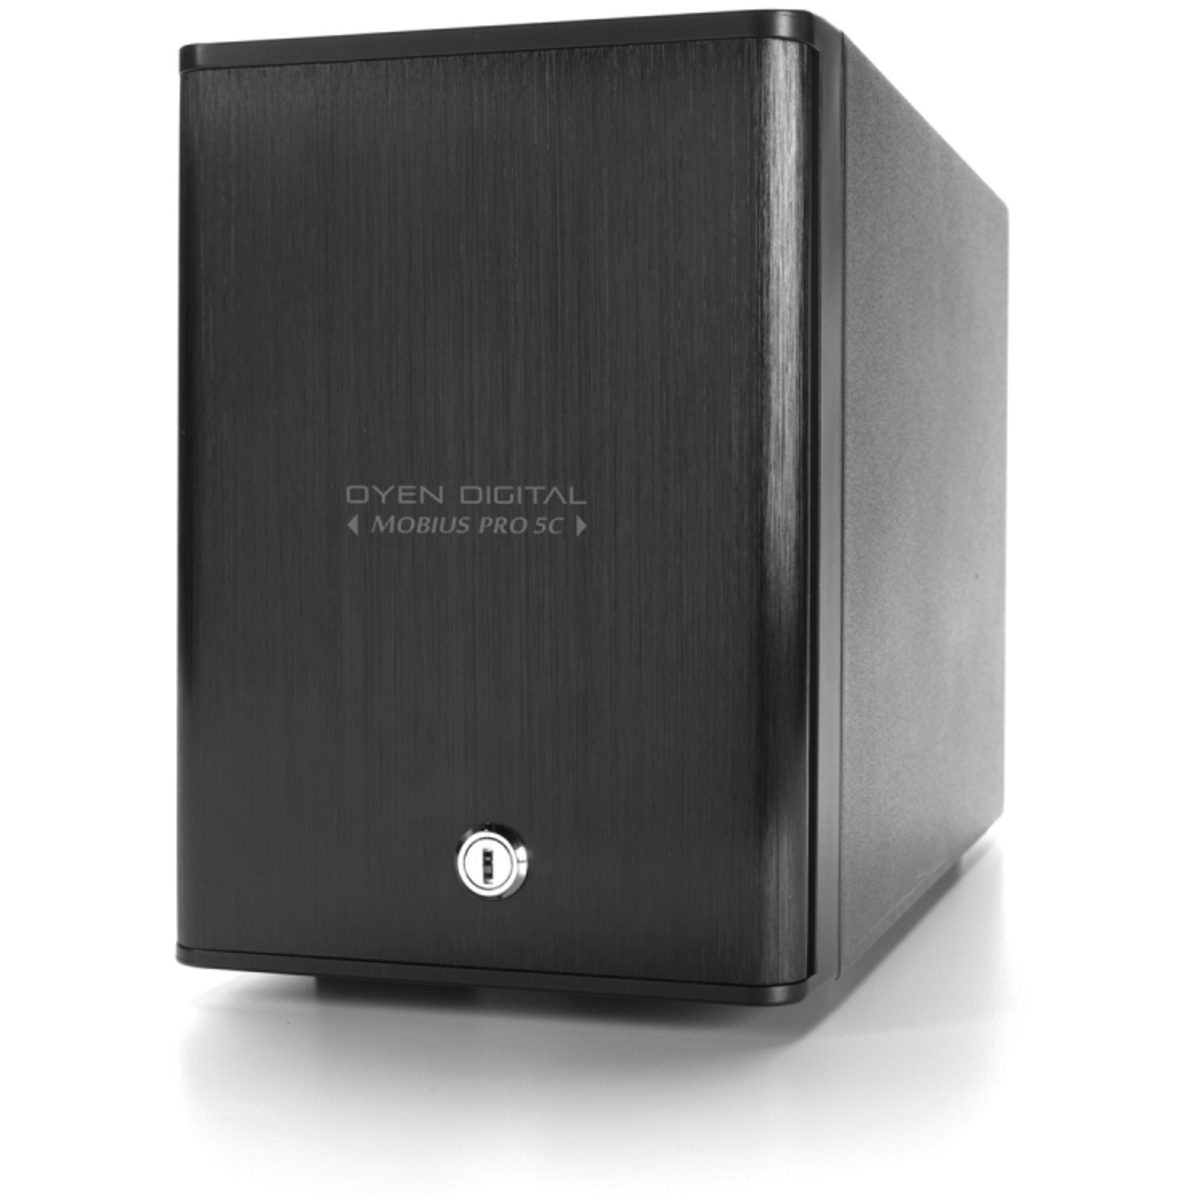 OYEN Mobius Pro 5C 5-Bay USB-C RAID 60tb 5-Bay Desktop Multimedia / Power User / Business DAS - Direct Attached Storage Device 5x12tb Seagate IronWolf ST12000VN0008 3.5 7200rpm SATA 6Gb/s HDD NAS Class Drives Installed - Burn-In Tested Mobius Pro 5C 5-Bay USB-C RAID